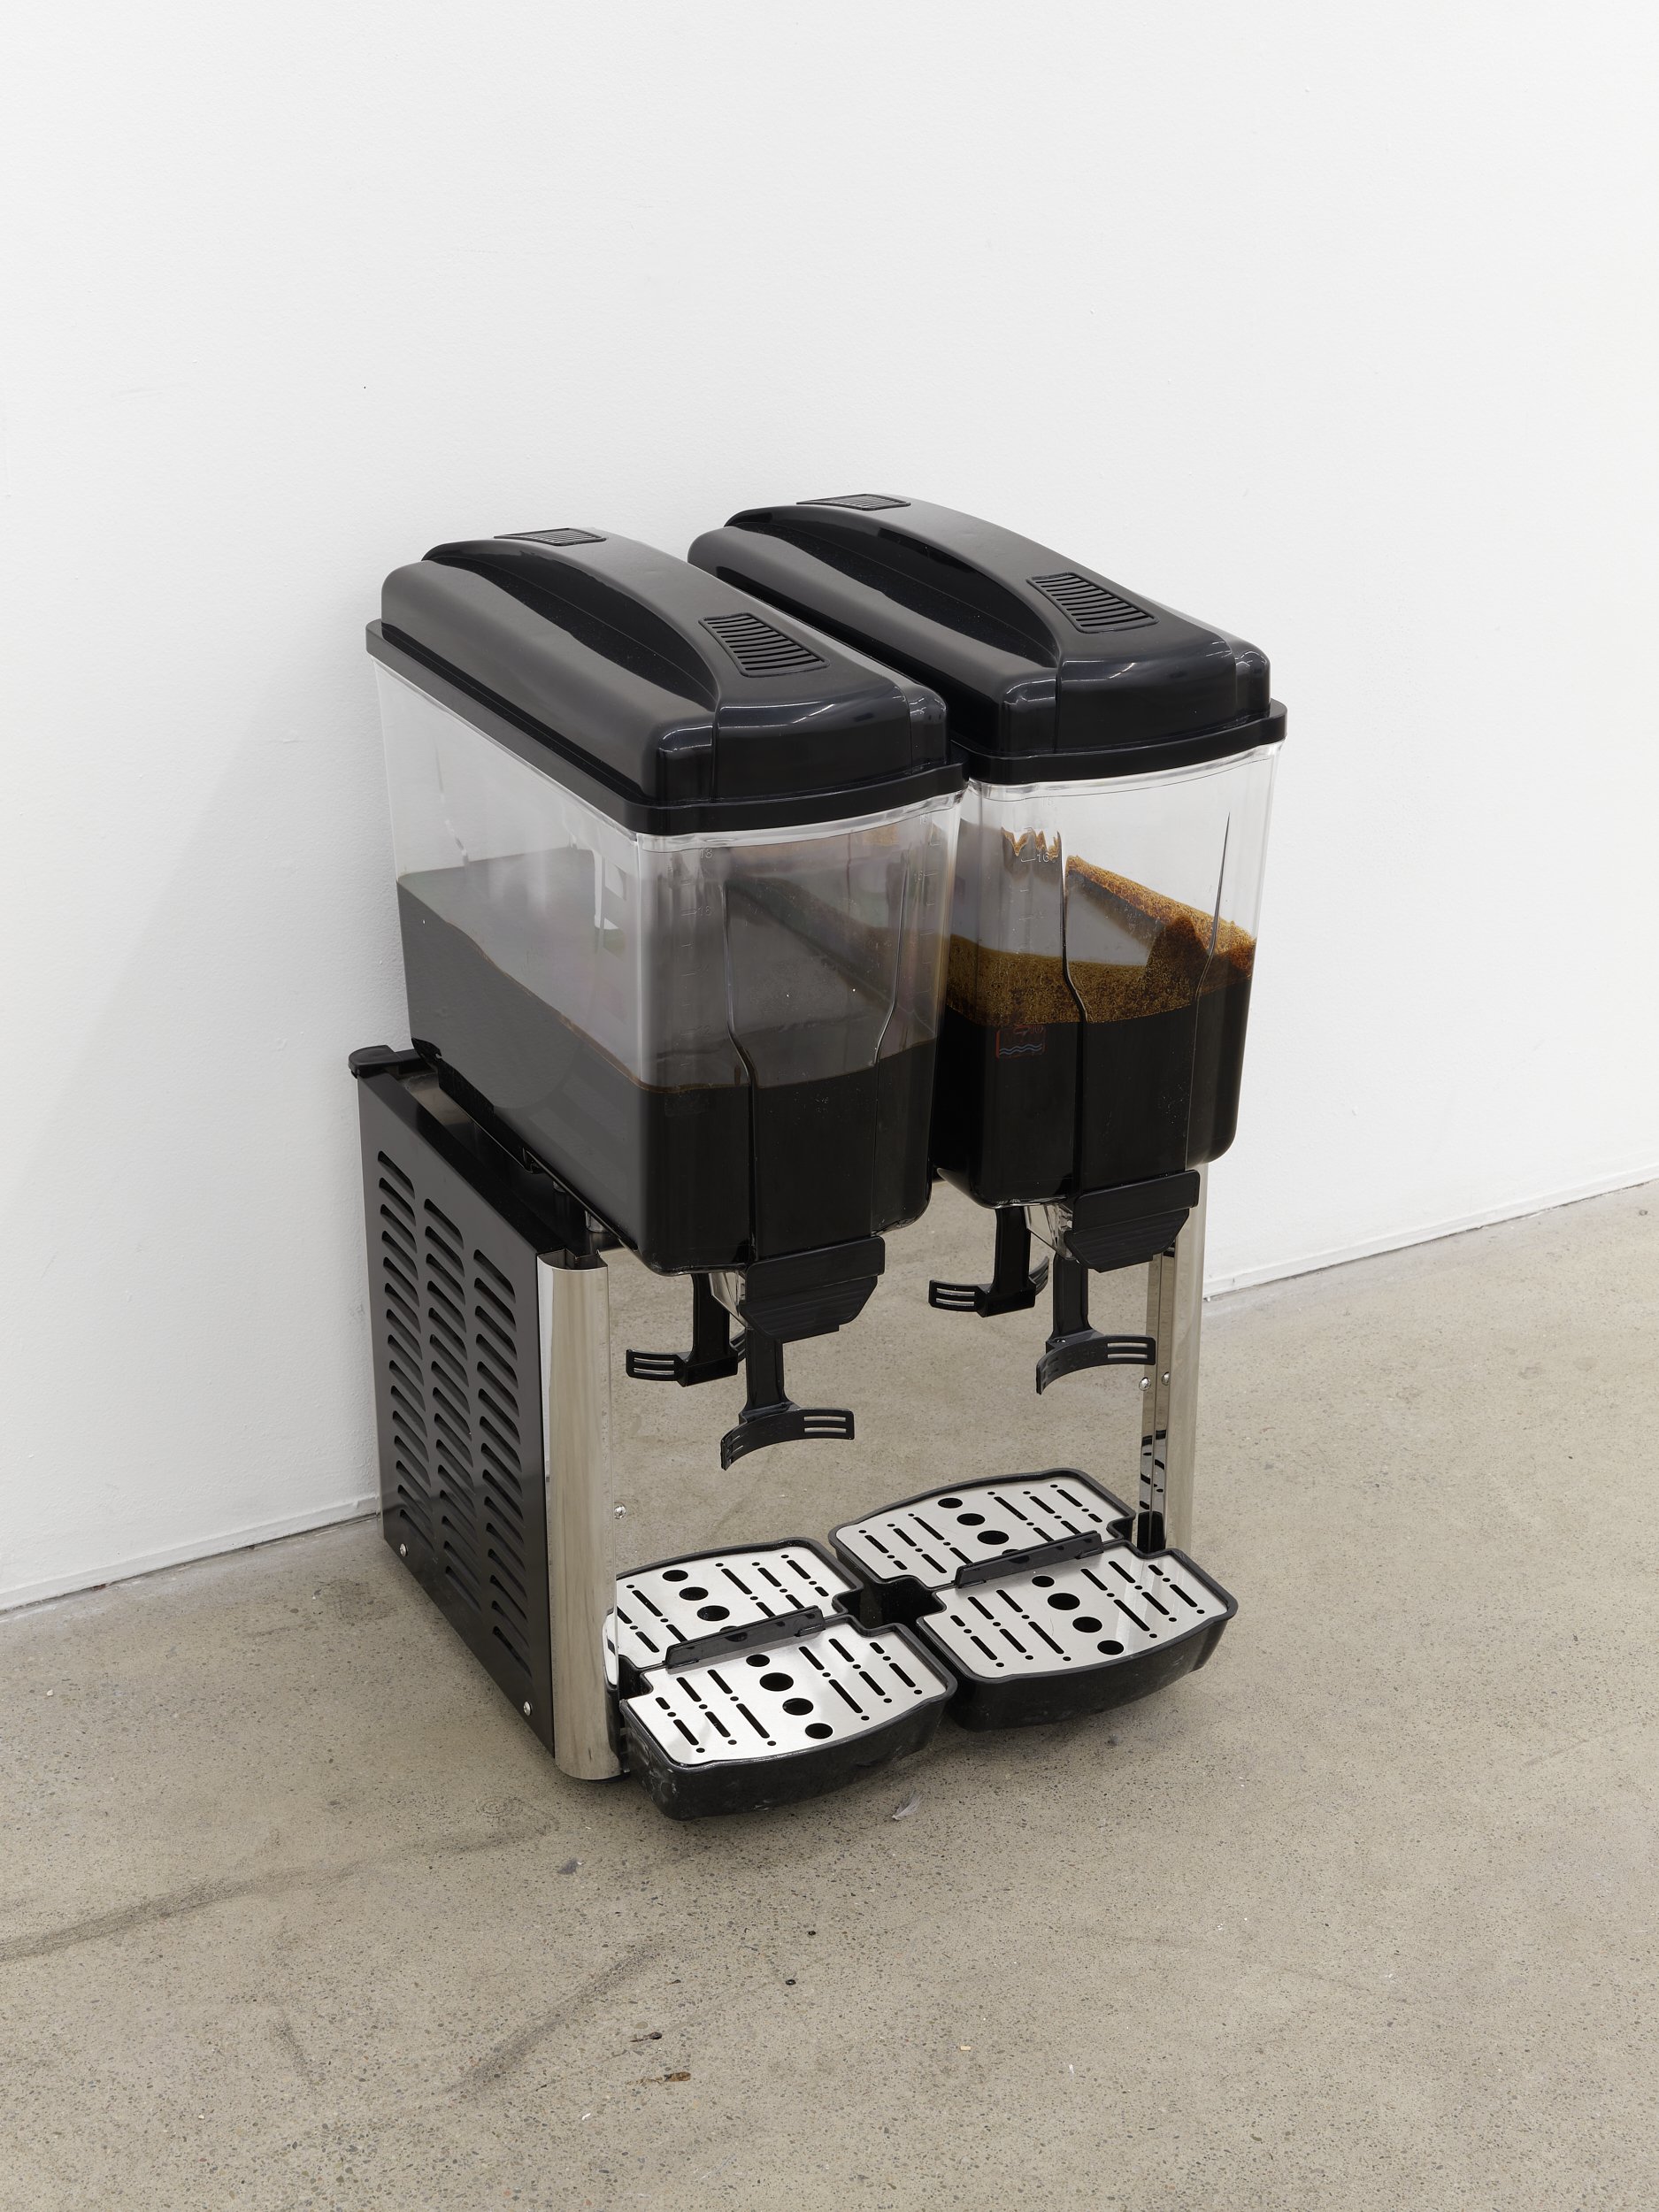  Anthony Discenza  Familiars (do you love?),  2024 West Texas asphaltic petroleum, commercial beverage dispenser 28 x 16 x 18 inches 